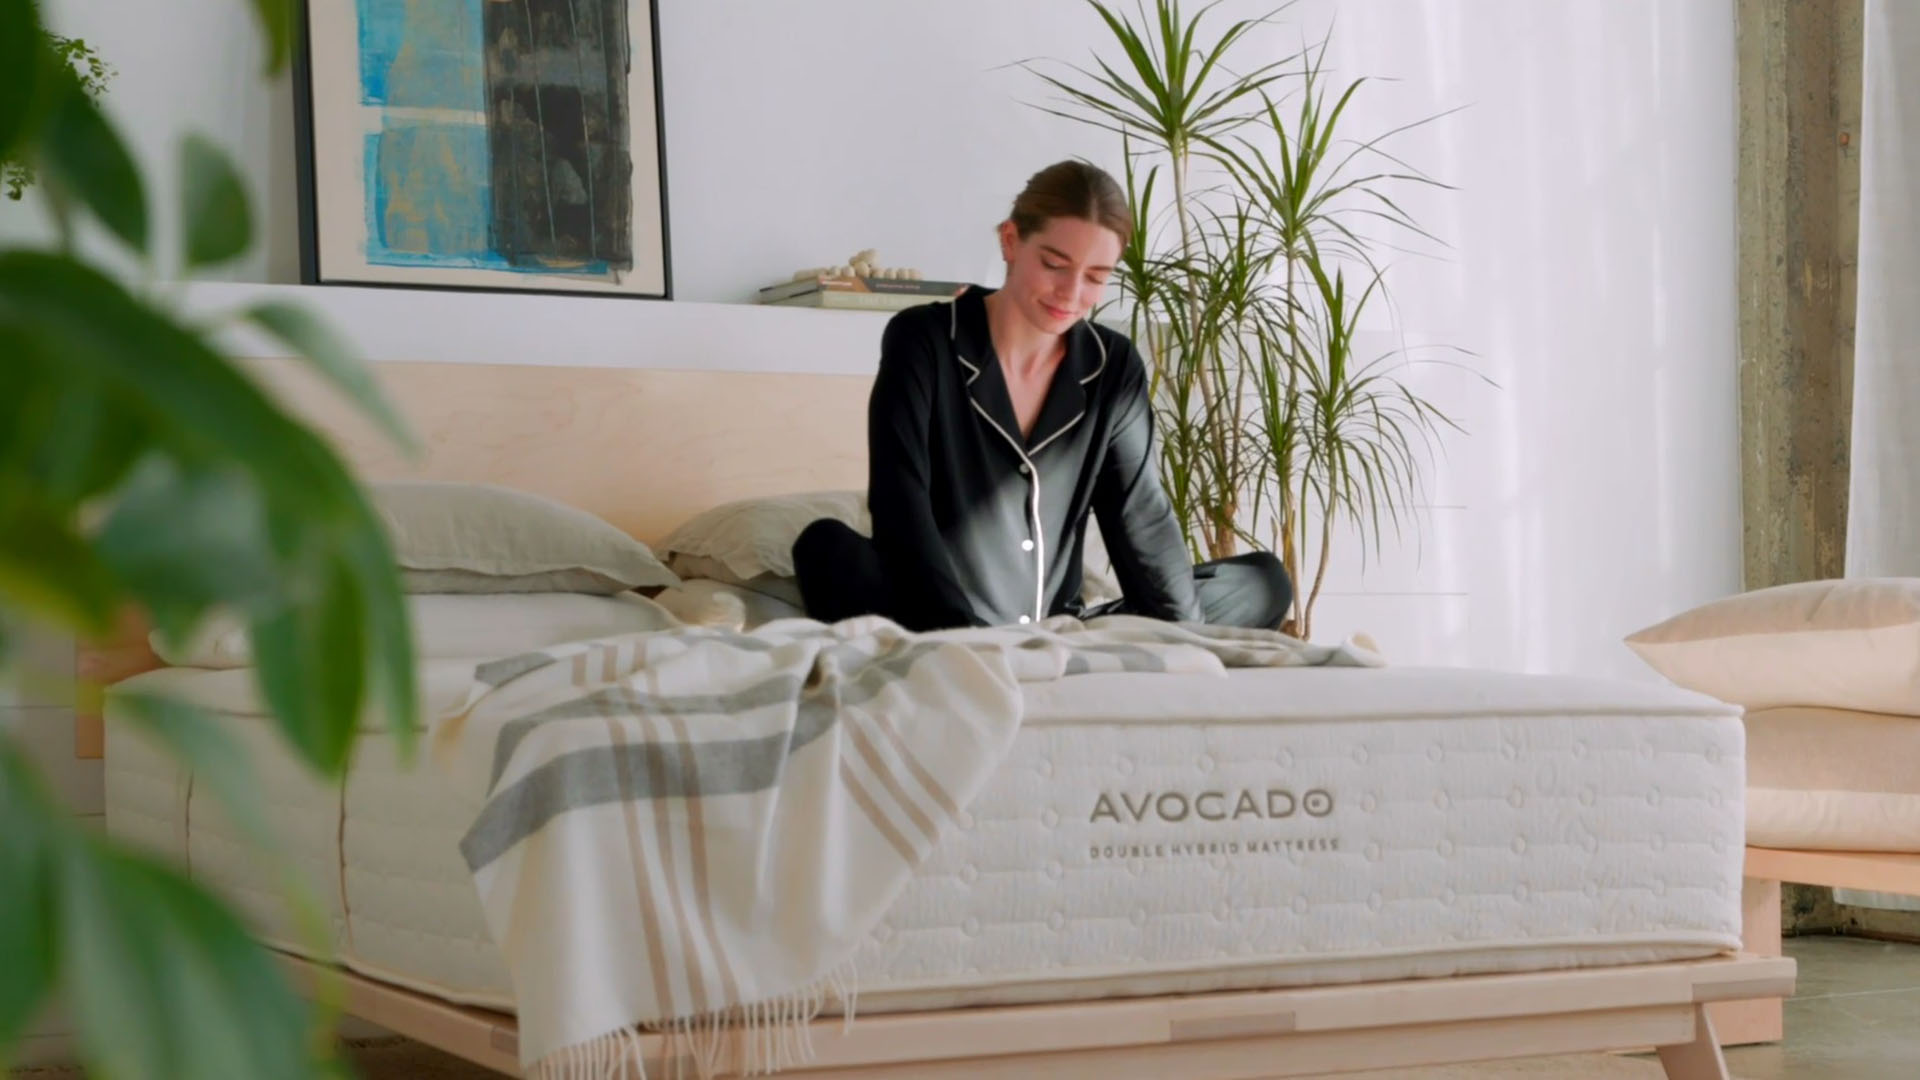 Where to buy Avocado Mattress in College Station, Texas